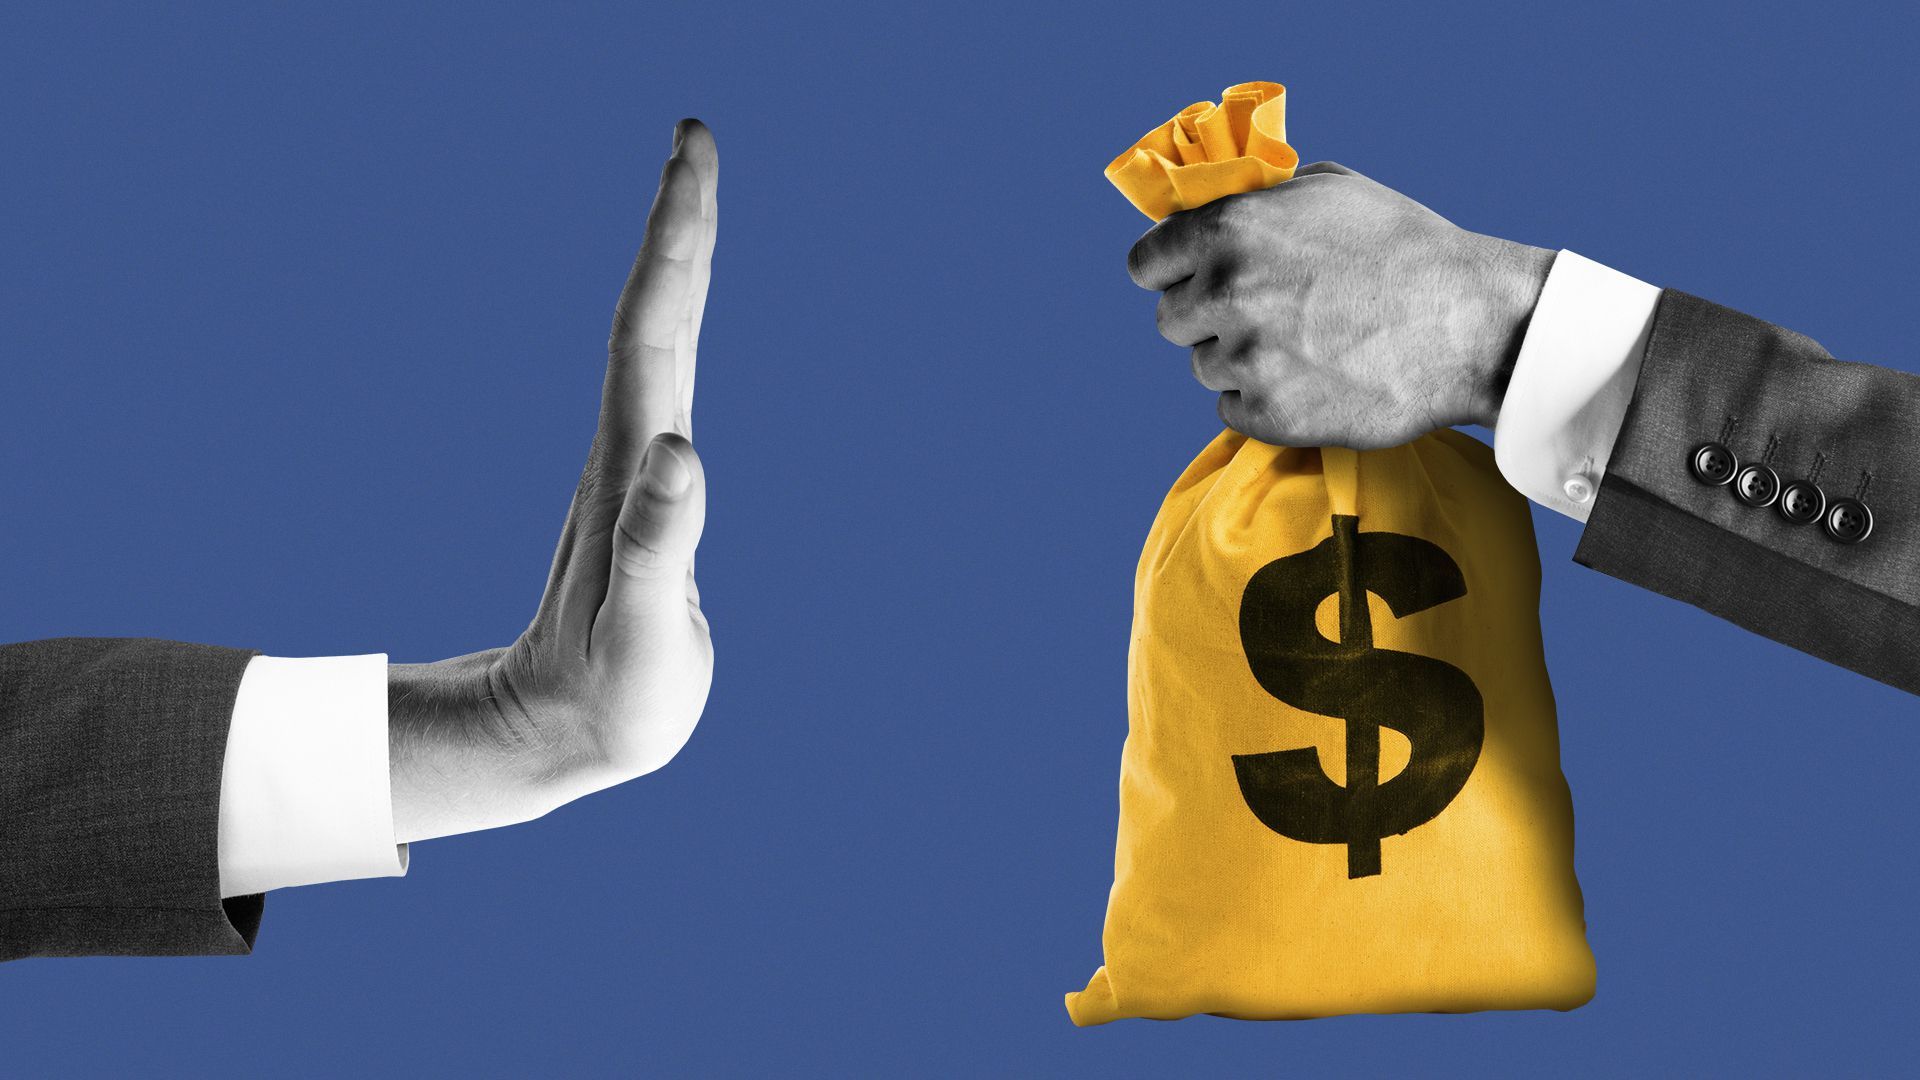 Illustration of hand holding offering a bag of money to another hand, which is refusing the offer.